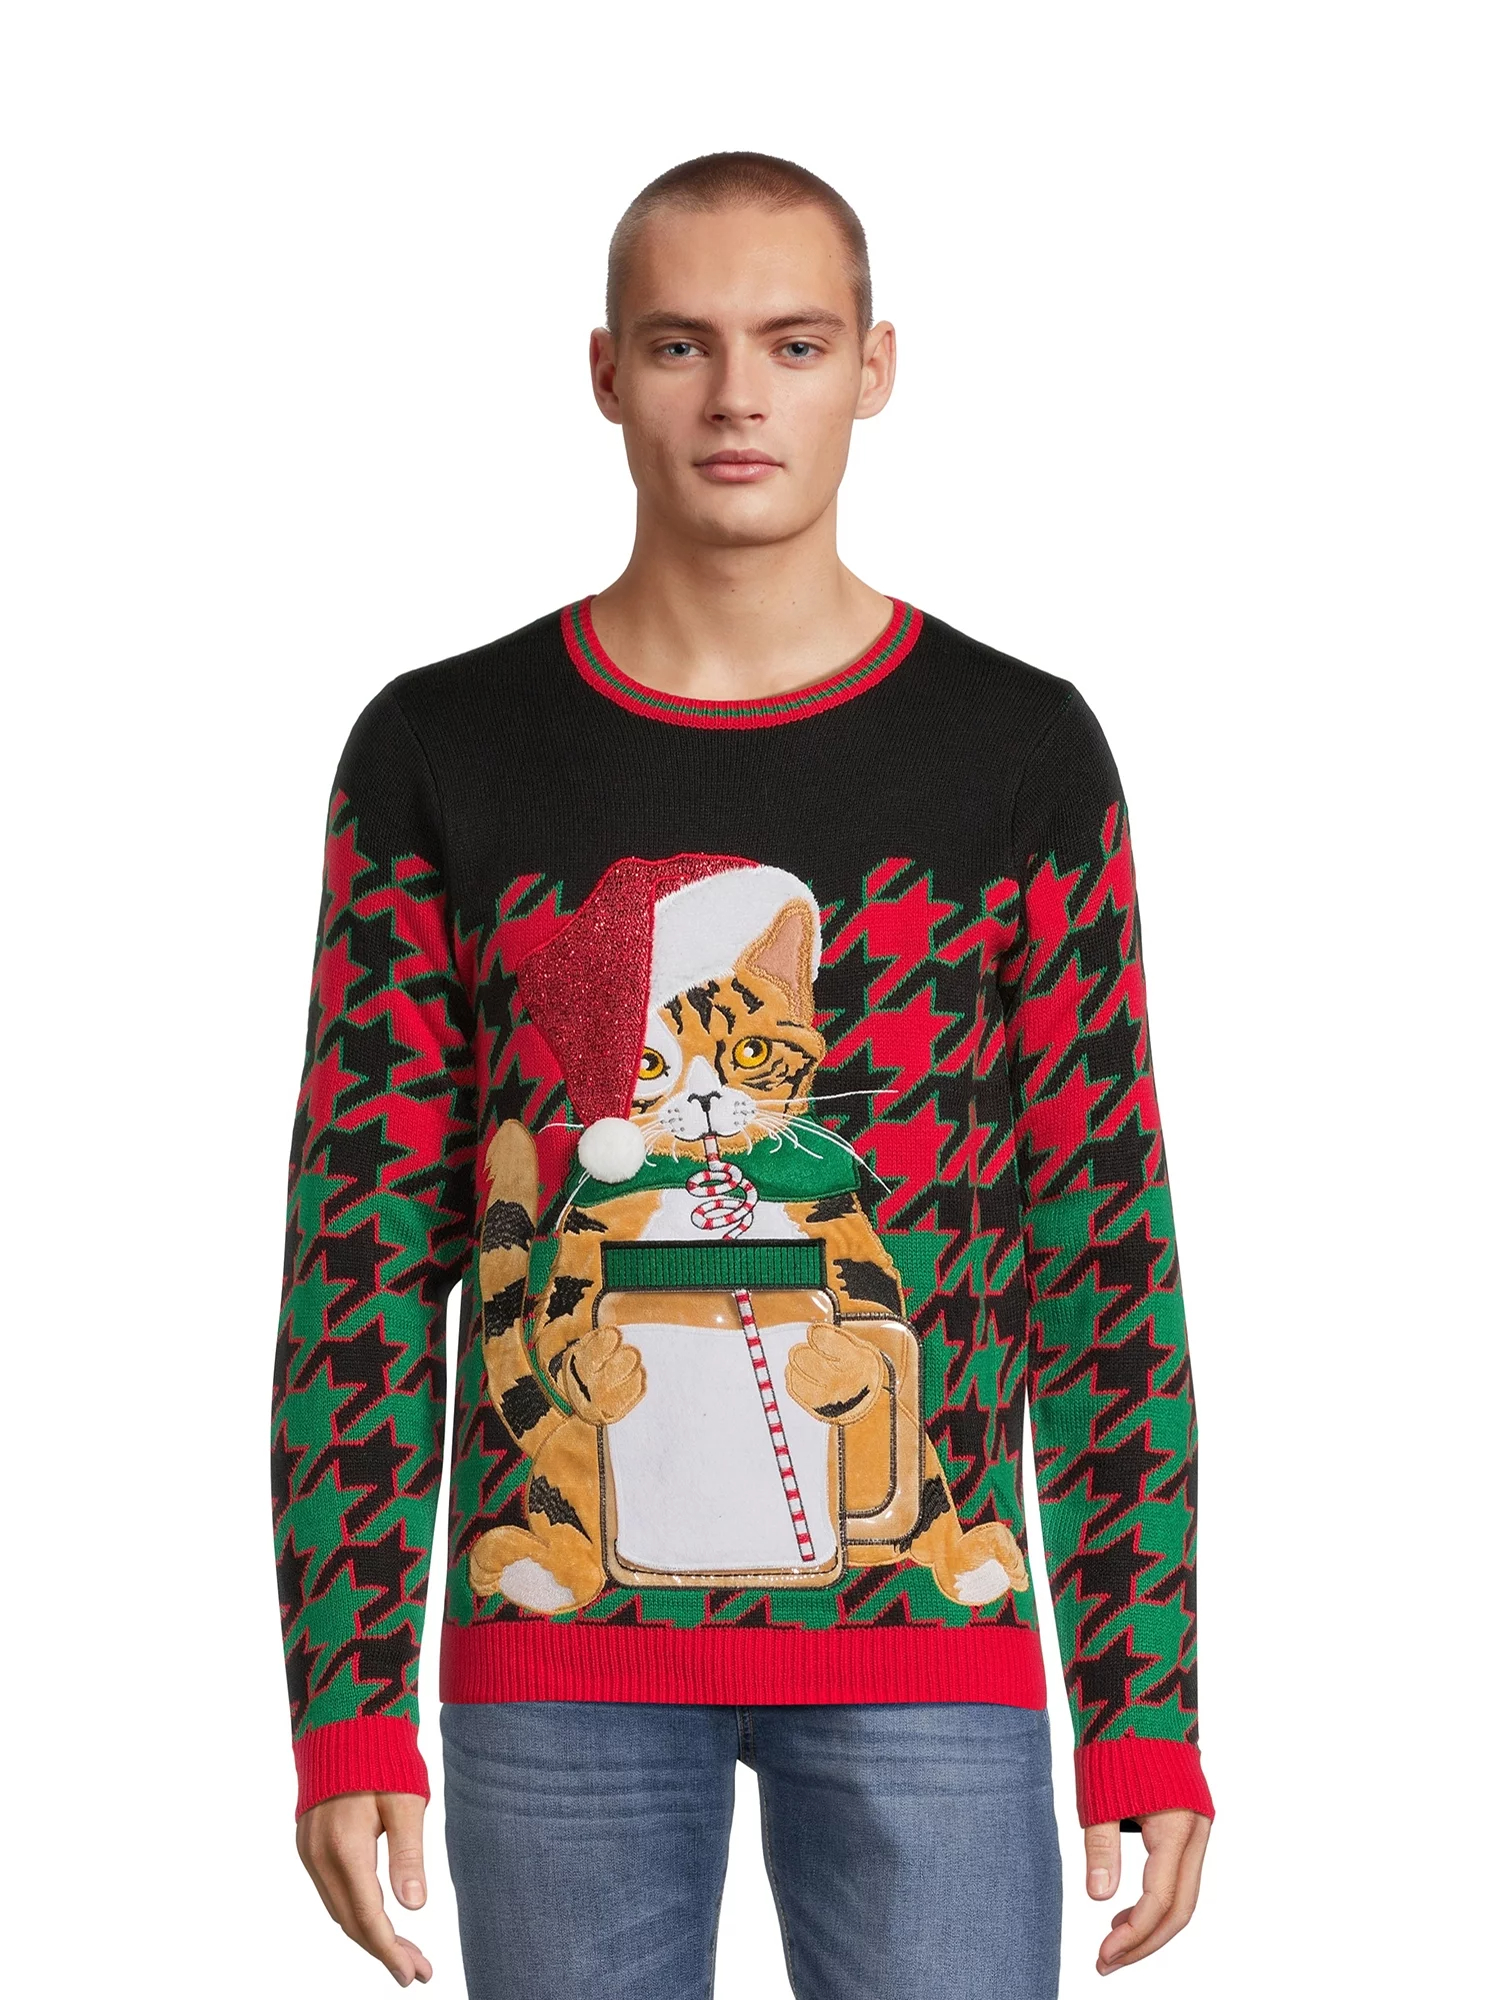 Men's Ugly Sweaters for Sale have become a popular fashion trend, especially during the holiday season and themed events.